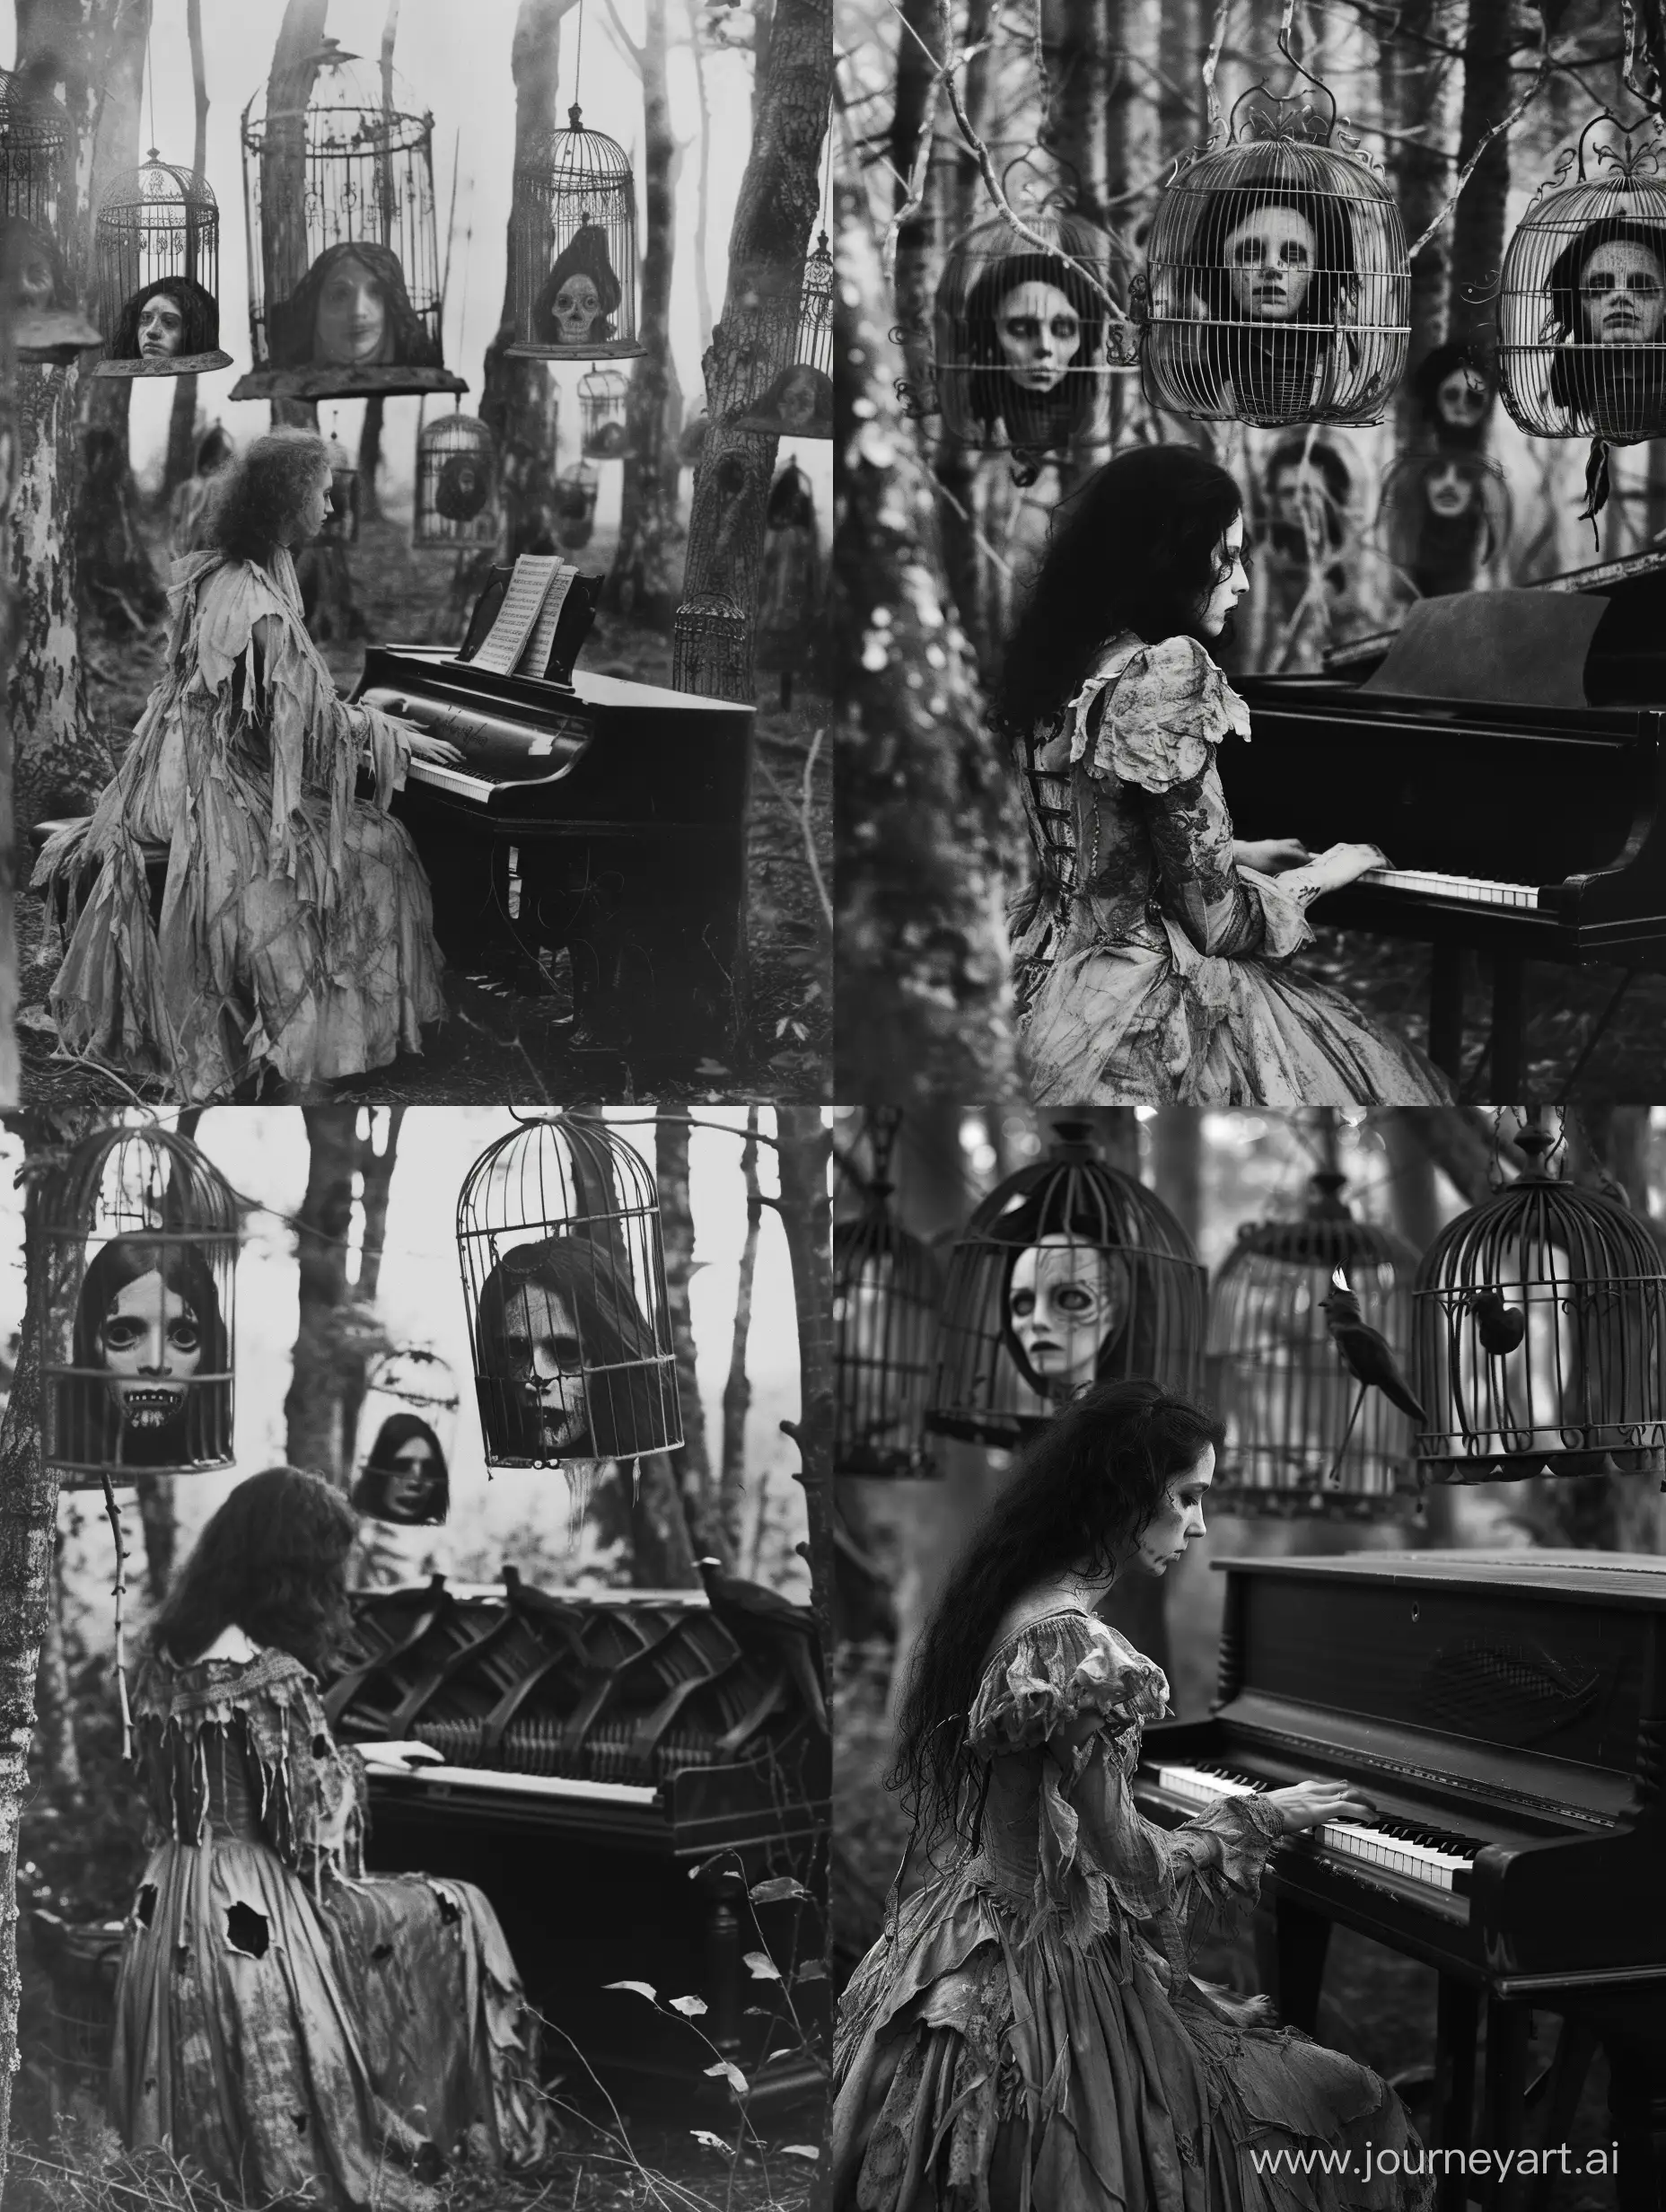 Lgrayscale photo that evokes folk horror, pagan witch wearing tattered vintage gown playing piano in a mysterious forest. In the background there’s large human size antique bird cages hanging in trees. Inside each cage is a hollow eyed woman, detailed face. the_ritual, creepypasta, folk horror, dark aesthetic, dark folk, dark magic, witch core